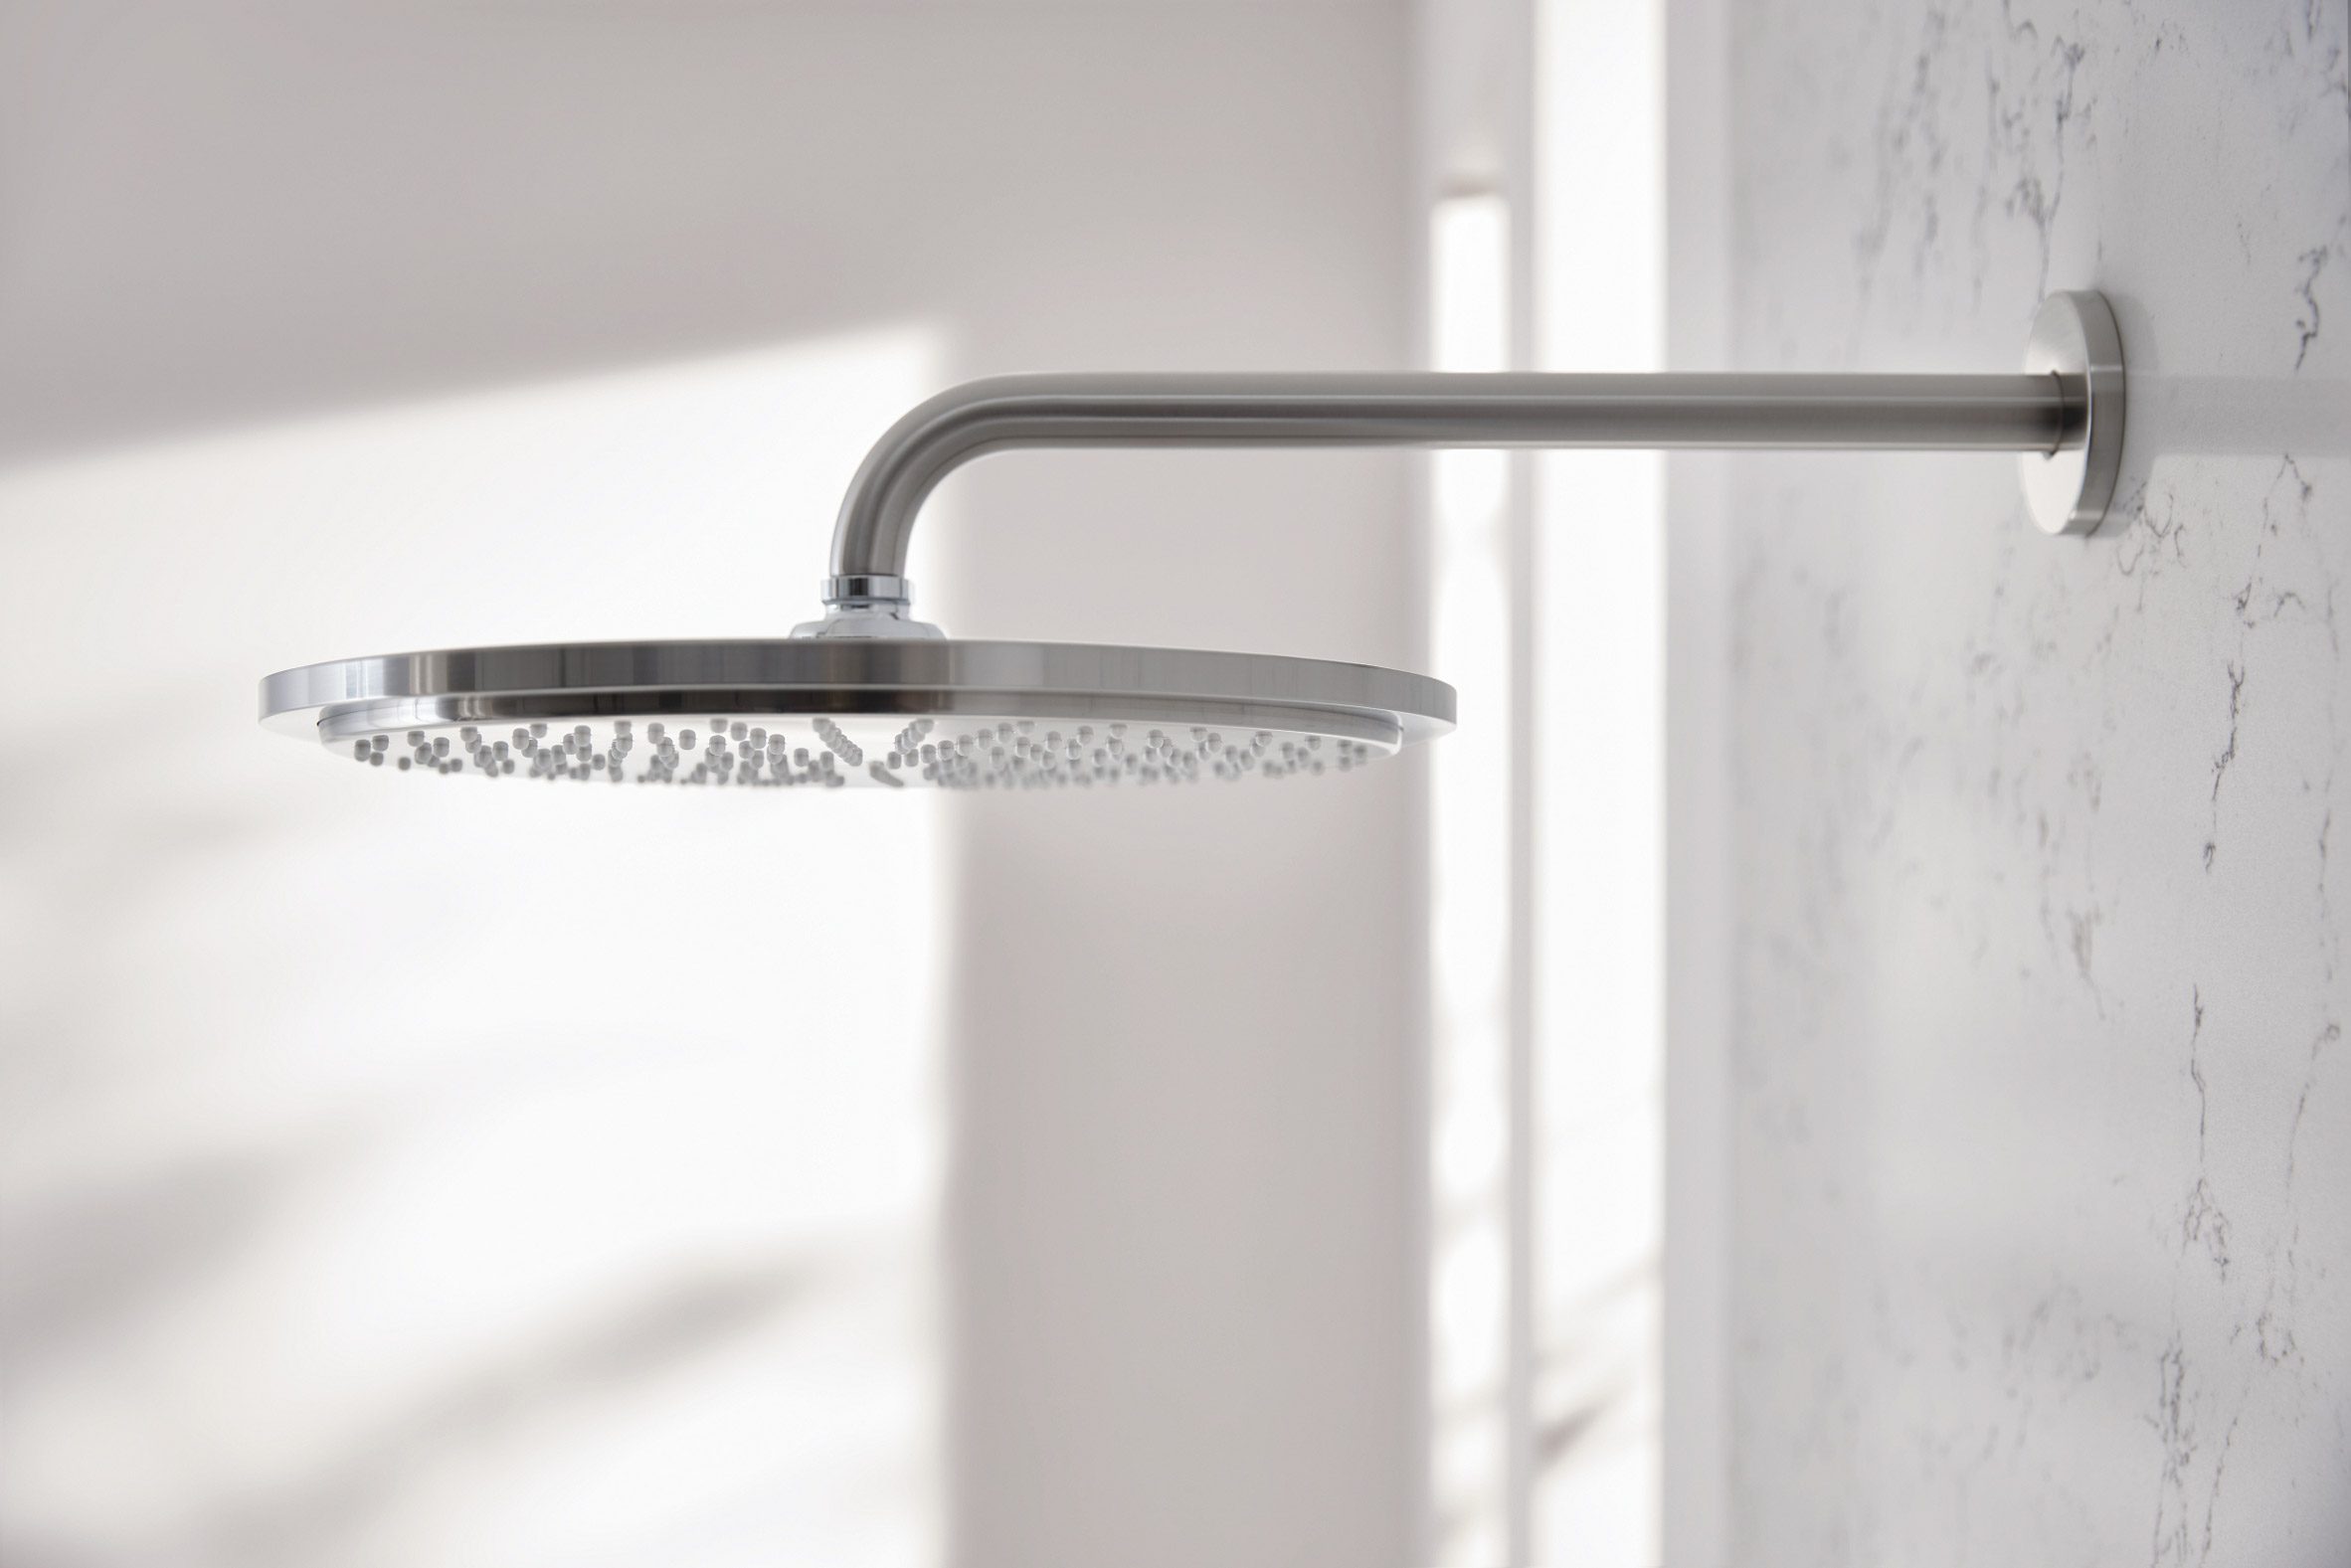 Silver Atrio Private Collection shower by Grohe